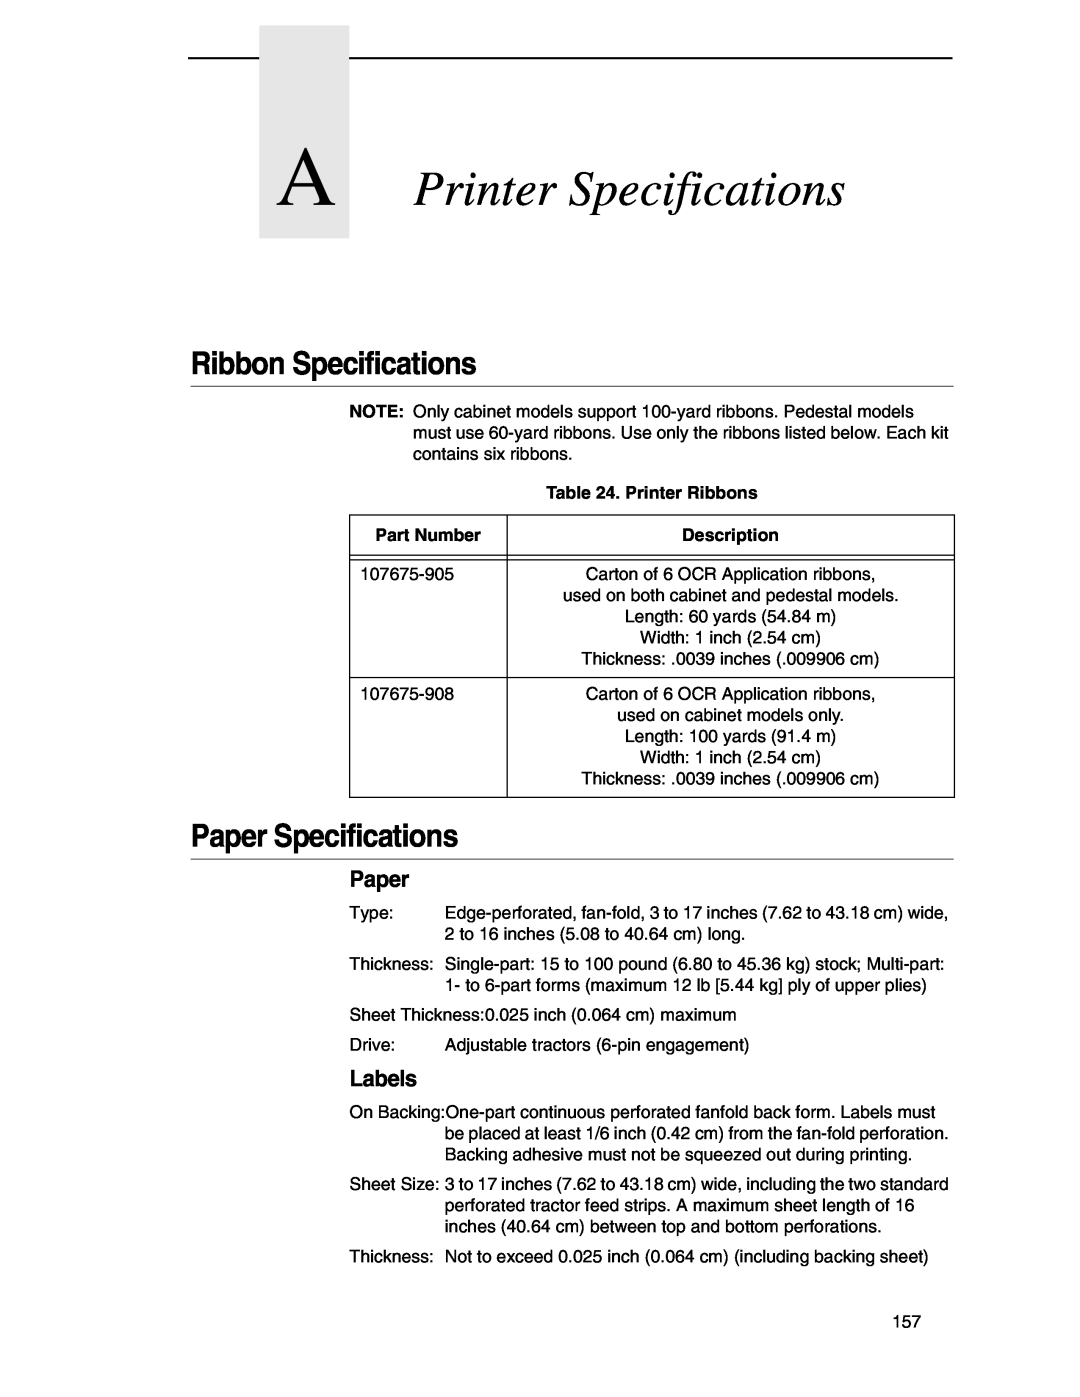 Compaq P5000 Series A Printer Specifications, Ribbon Specifications, Paper Specifications, Labels, Printer Ribbons 